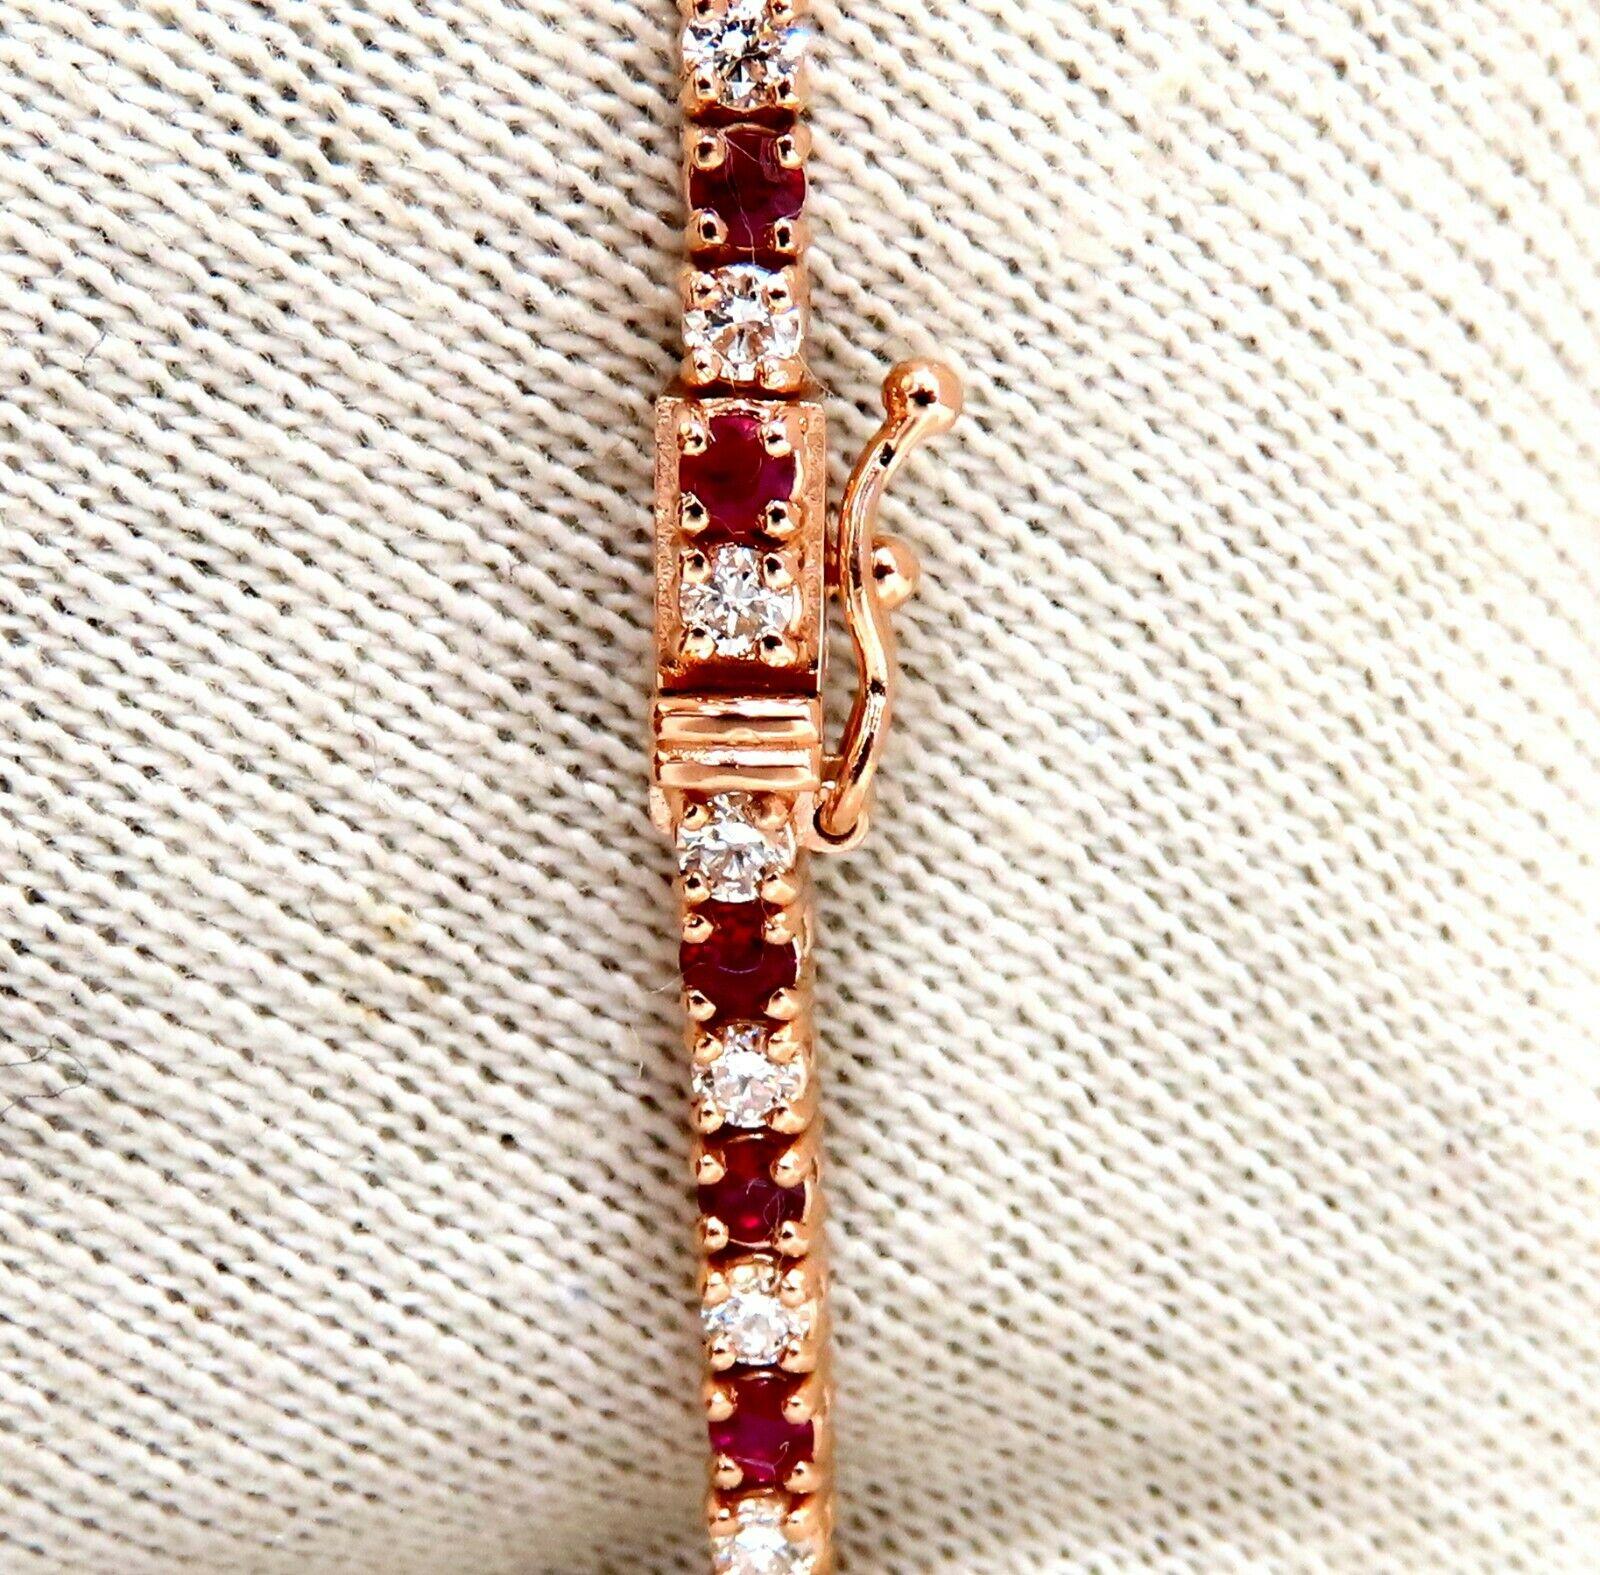 Ruby & Classic Alternating Tennis.

1.65ct. Natural ruby bracelet.

Rounds, full cuts 

Clean clarity

Transparent & Vivid Reds.

Average 1.5mm each

1.35ct Natural Diamonds

Rounds & full cuts

Vs-2 clarity G-color

14kt. pink gold 

14.1 Grams.

7